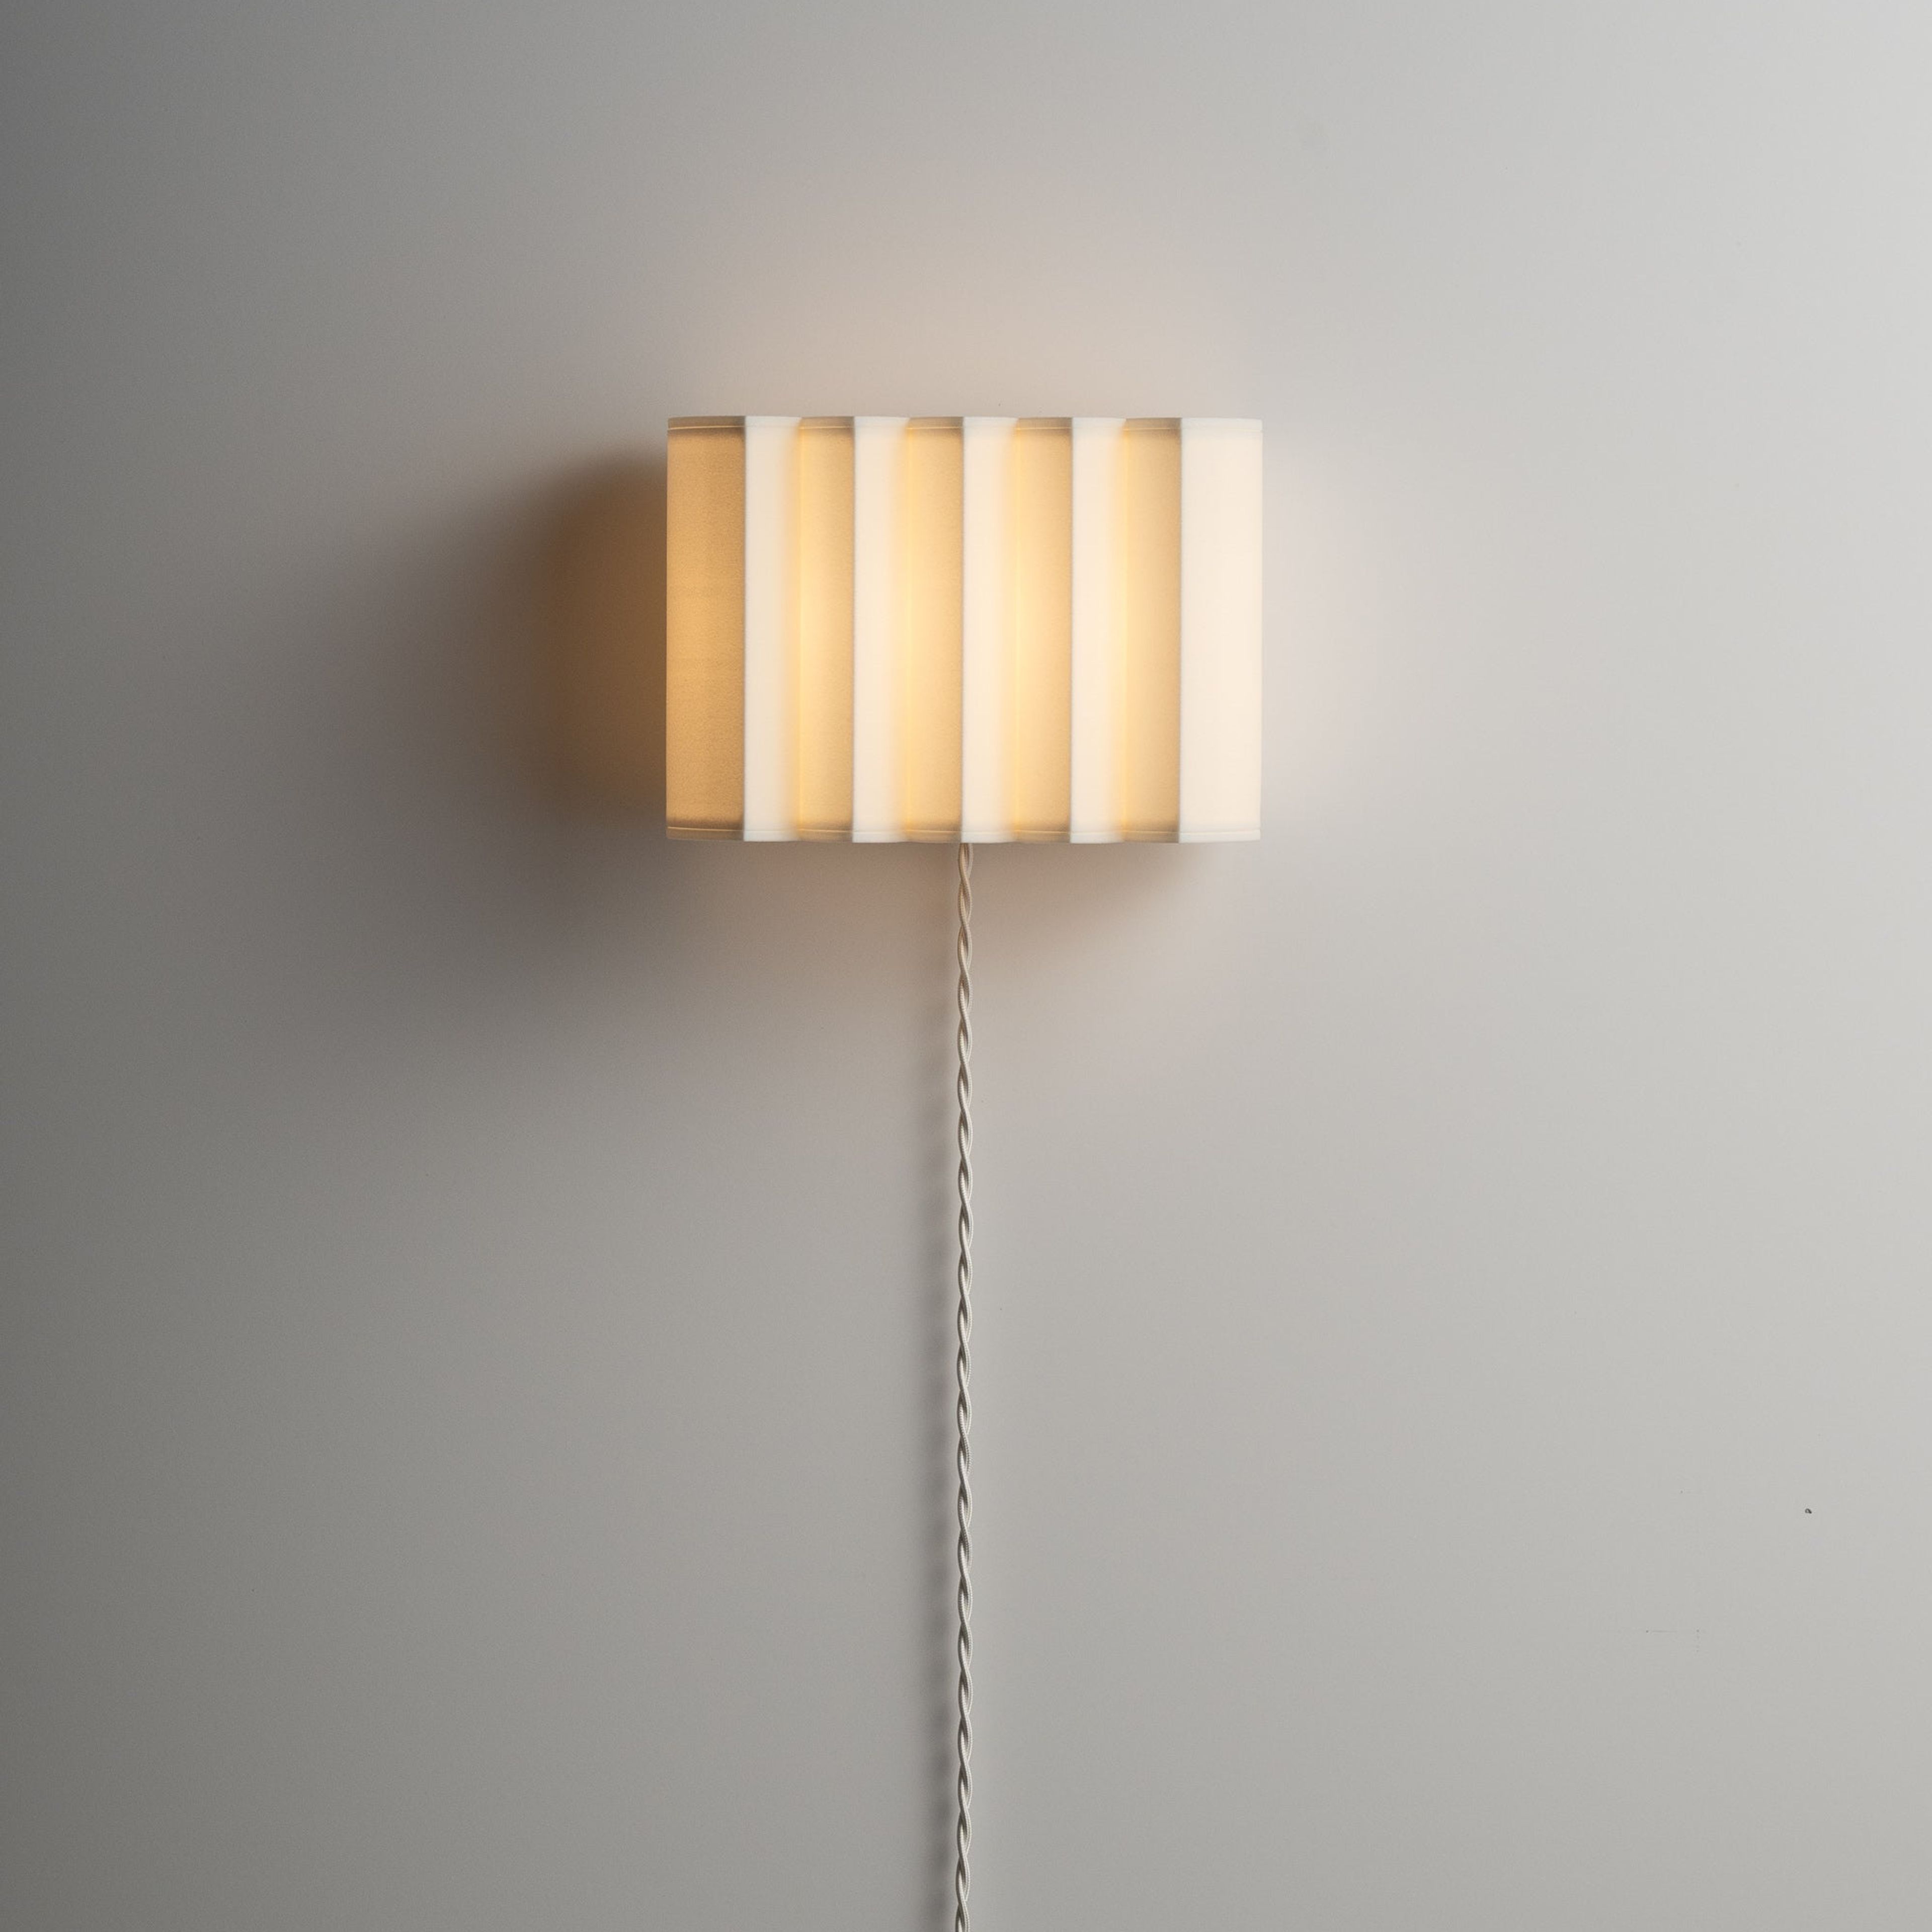 GALLERY Sconce Wired Plug-in